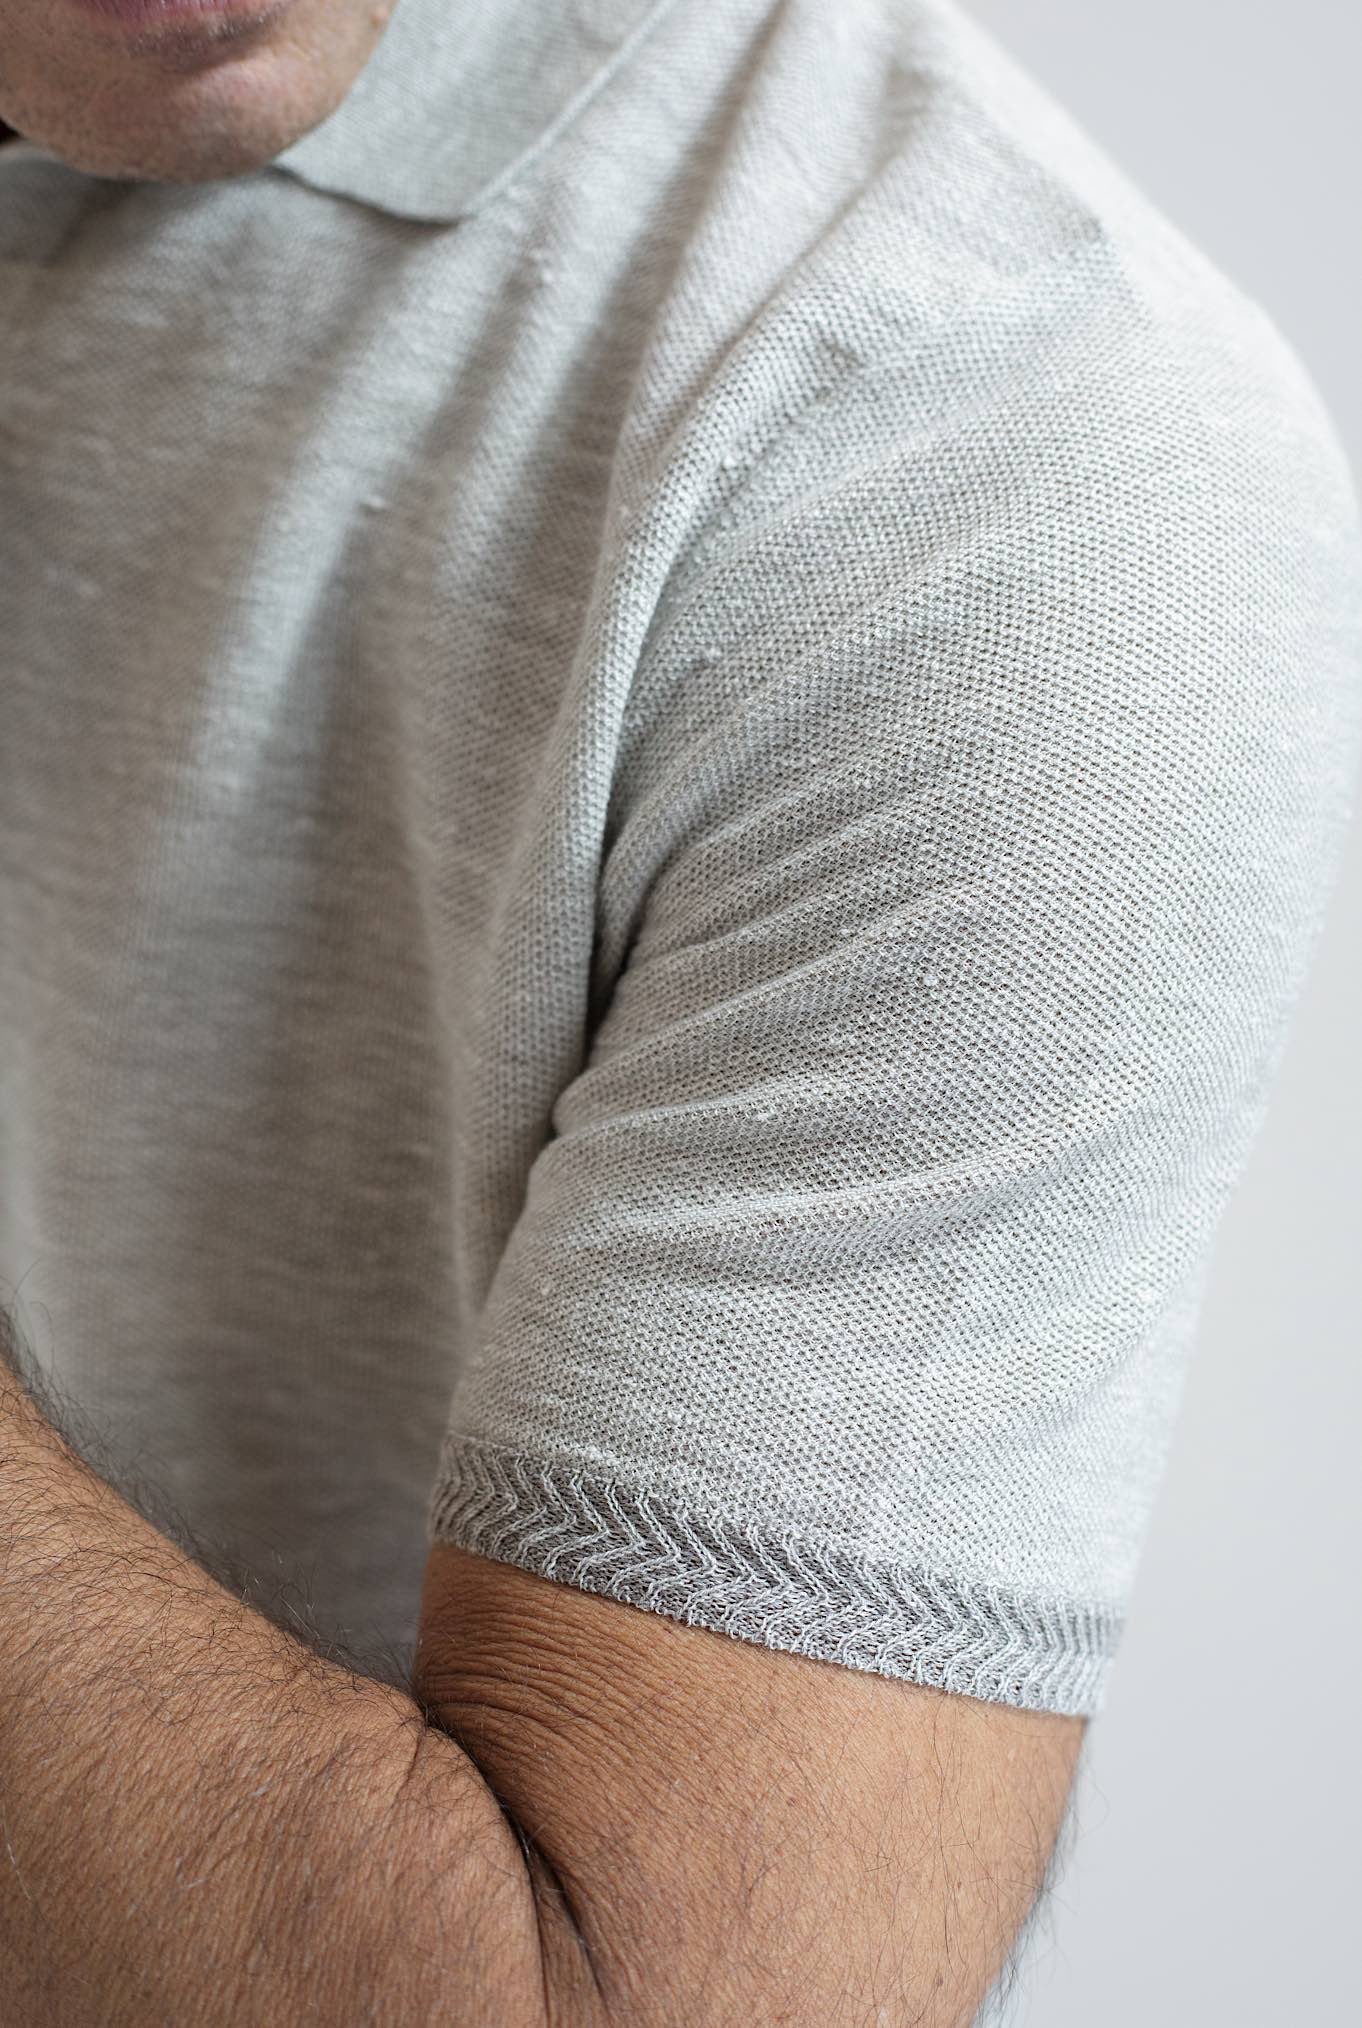 SEASE MM Polo Shirt in Pearl Gray Cotton and Linen